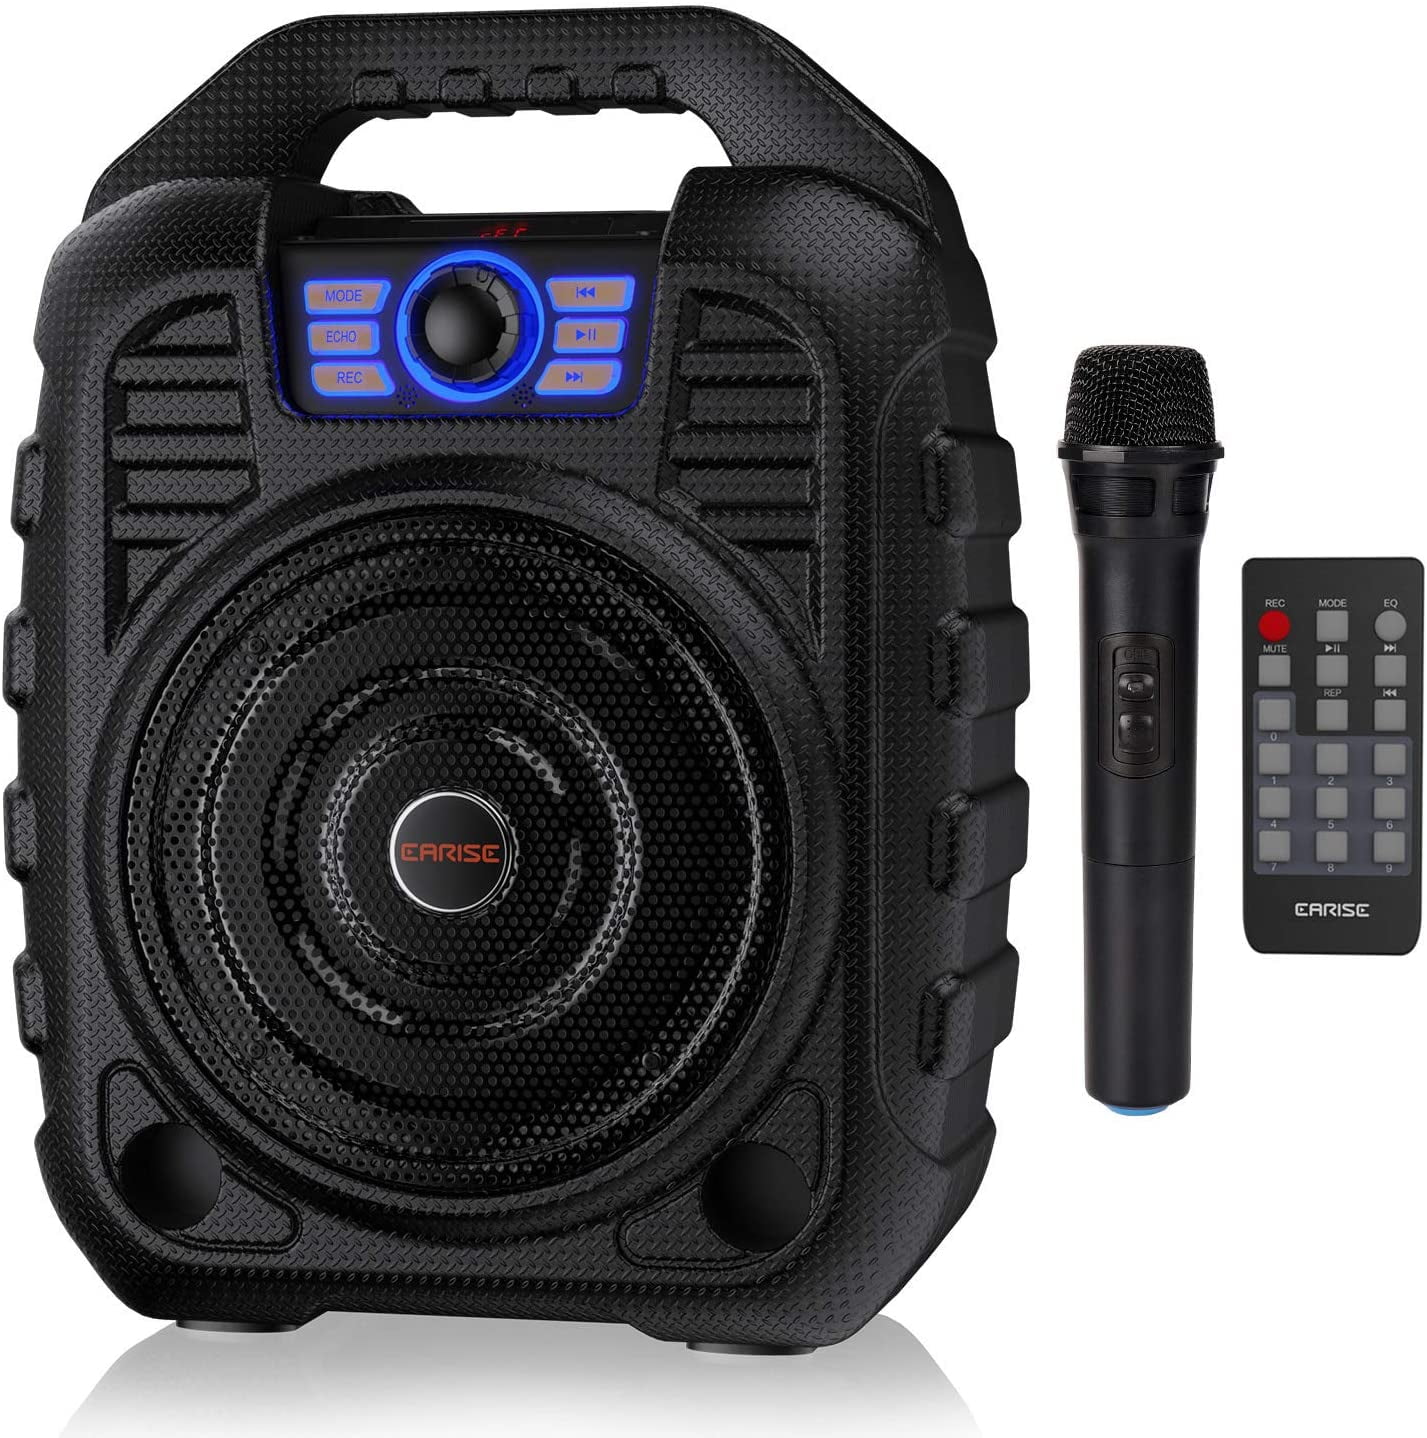 Black Rechargeable Remote Control Wireless Portable Karaoke Machine Speaker Home Karaoke System Music Player for Kids Adult Party Kids Bluetooth Karaoke Machine with 2 Microphones 